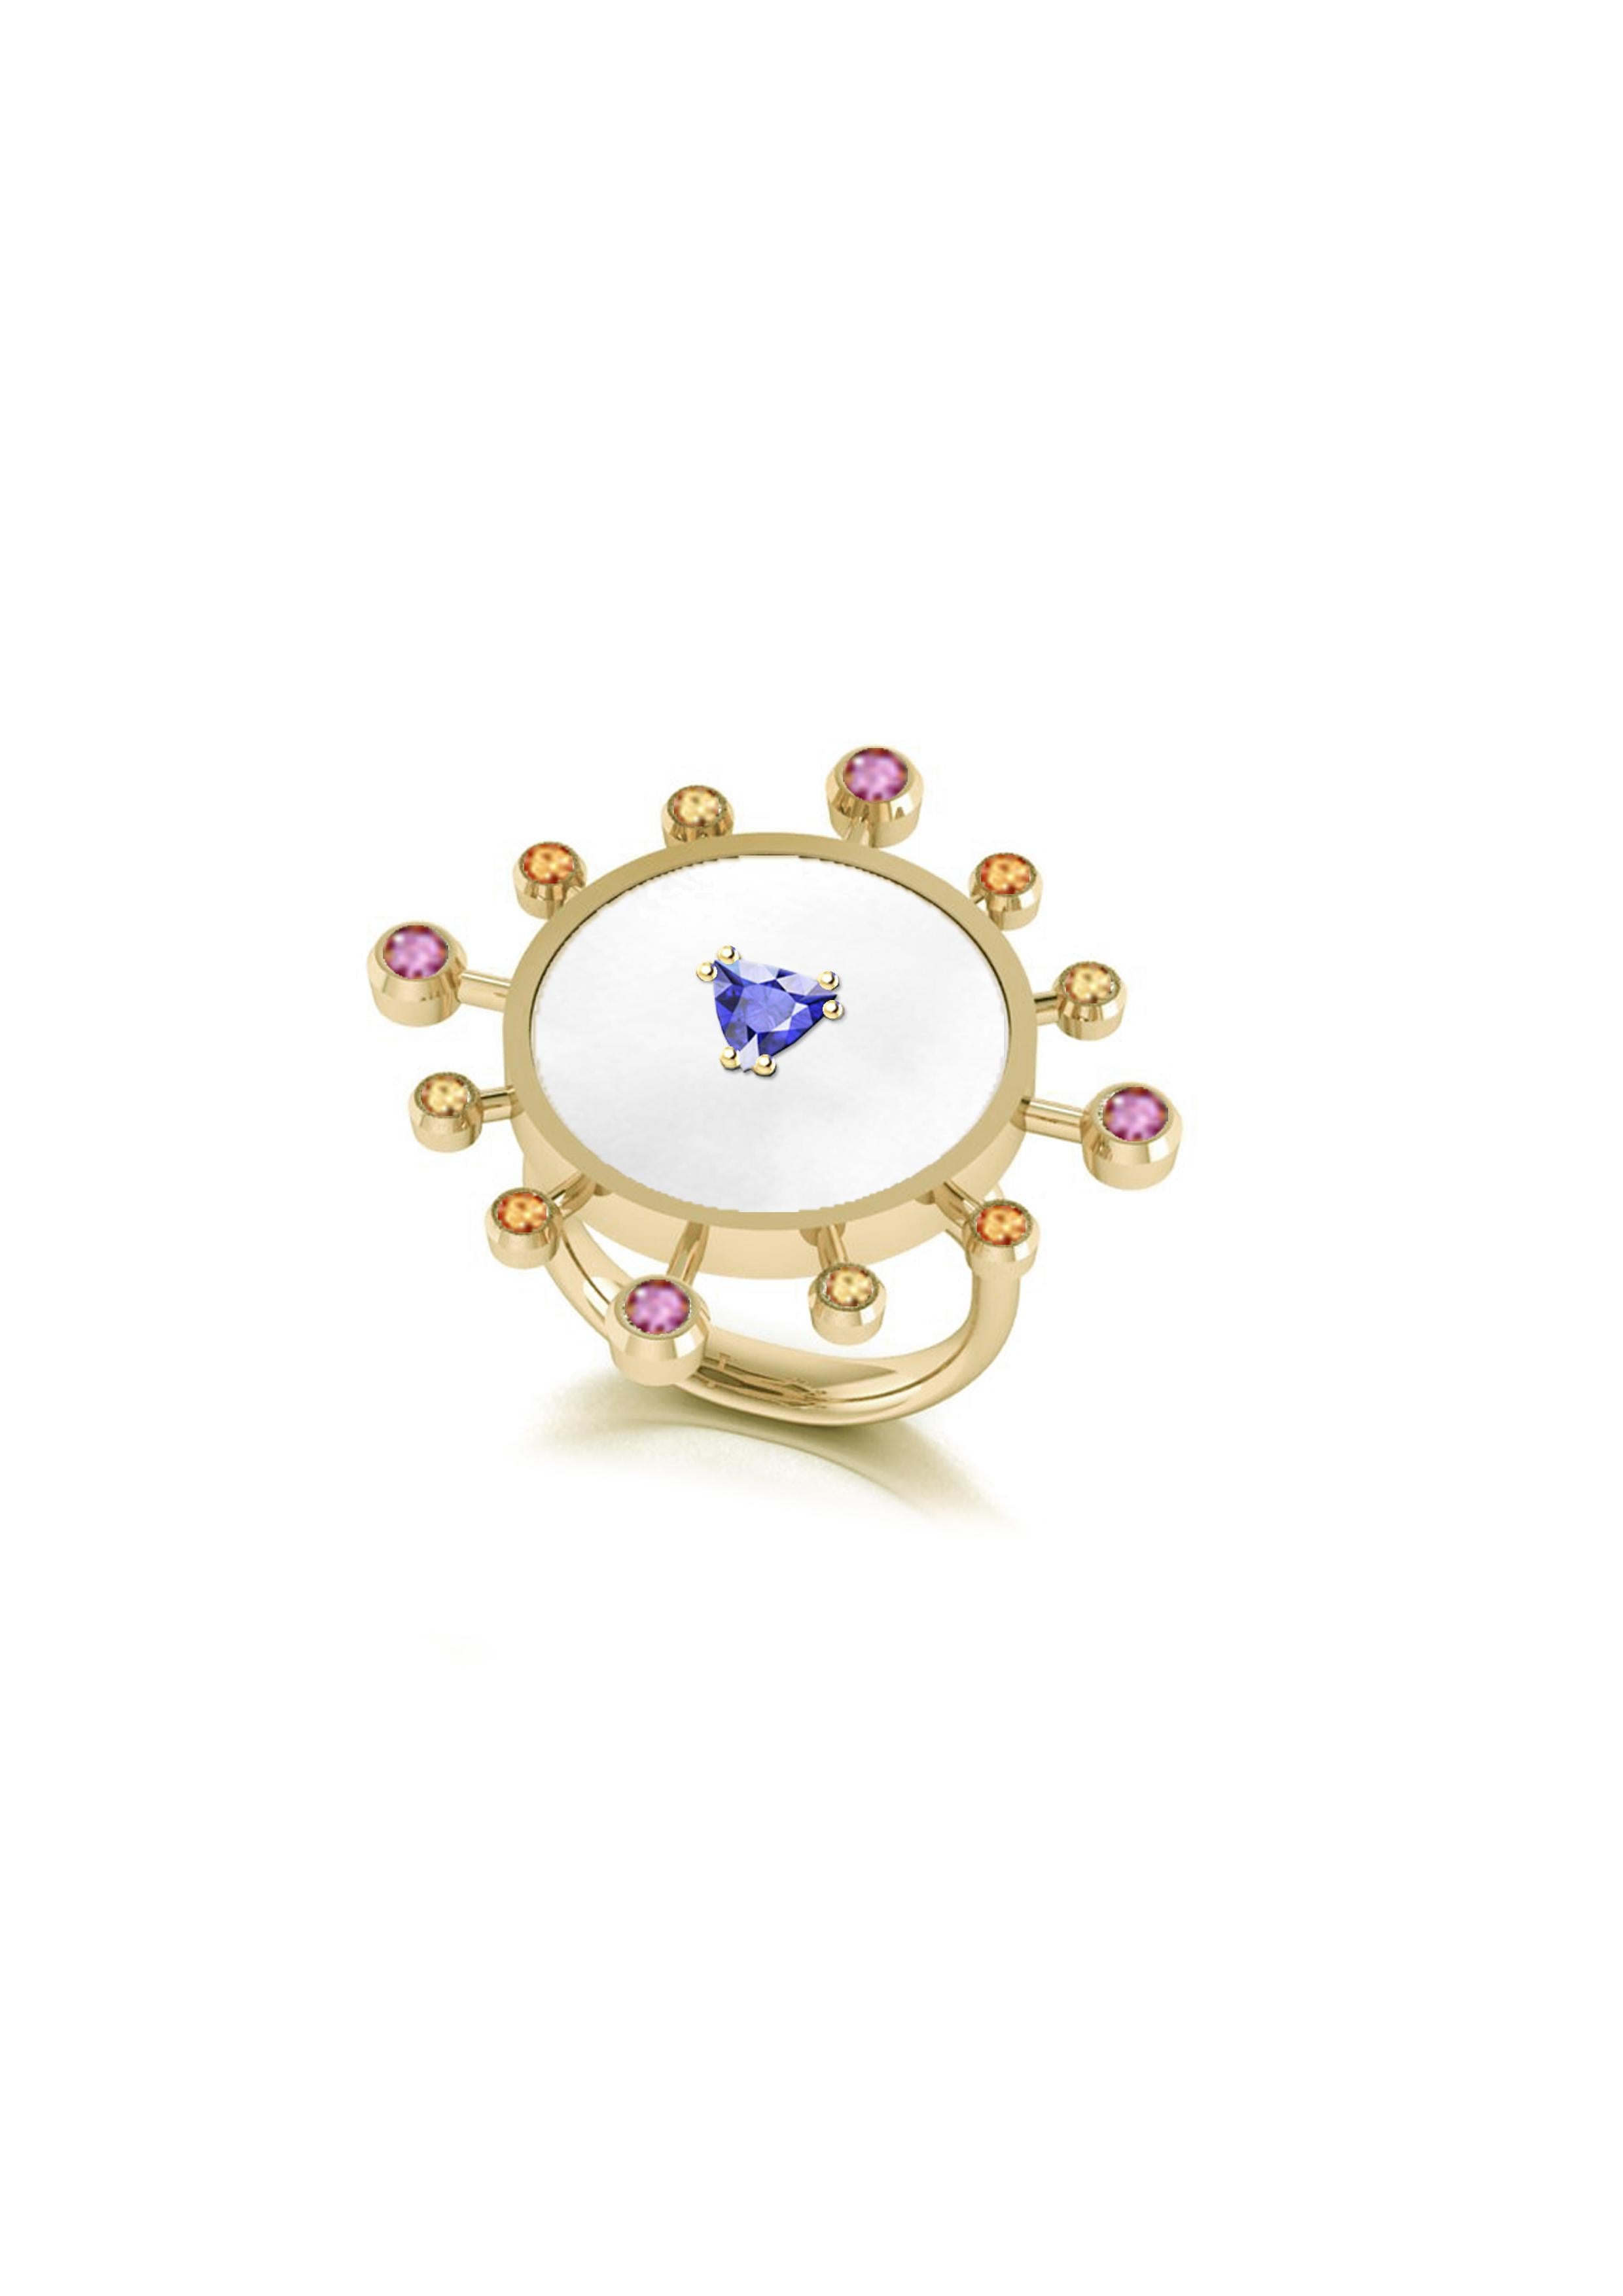 Sunray Collection- Truly Inspired by watch's geometry and modernism- it expresses joy and energy through colors and light. 
Sunray Ring is made by 18kt yellow gold ( 8,60 gr), natural trillion cut Tanzanite ( mm 5x5) , 12 multicolor sapphires ct